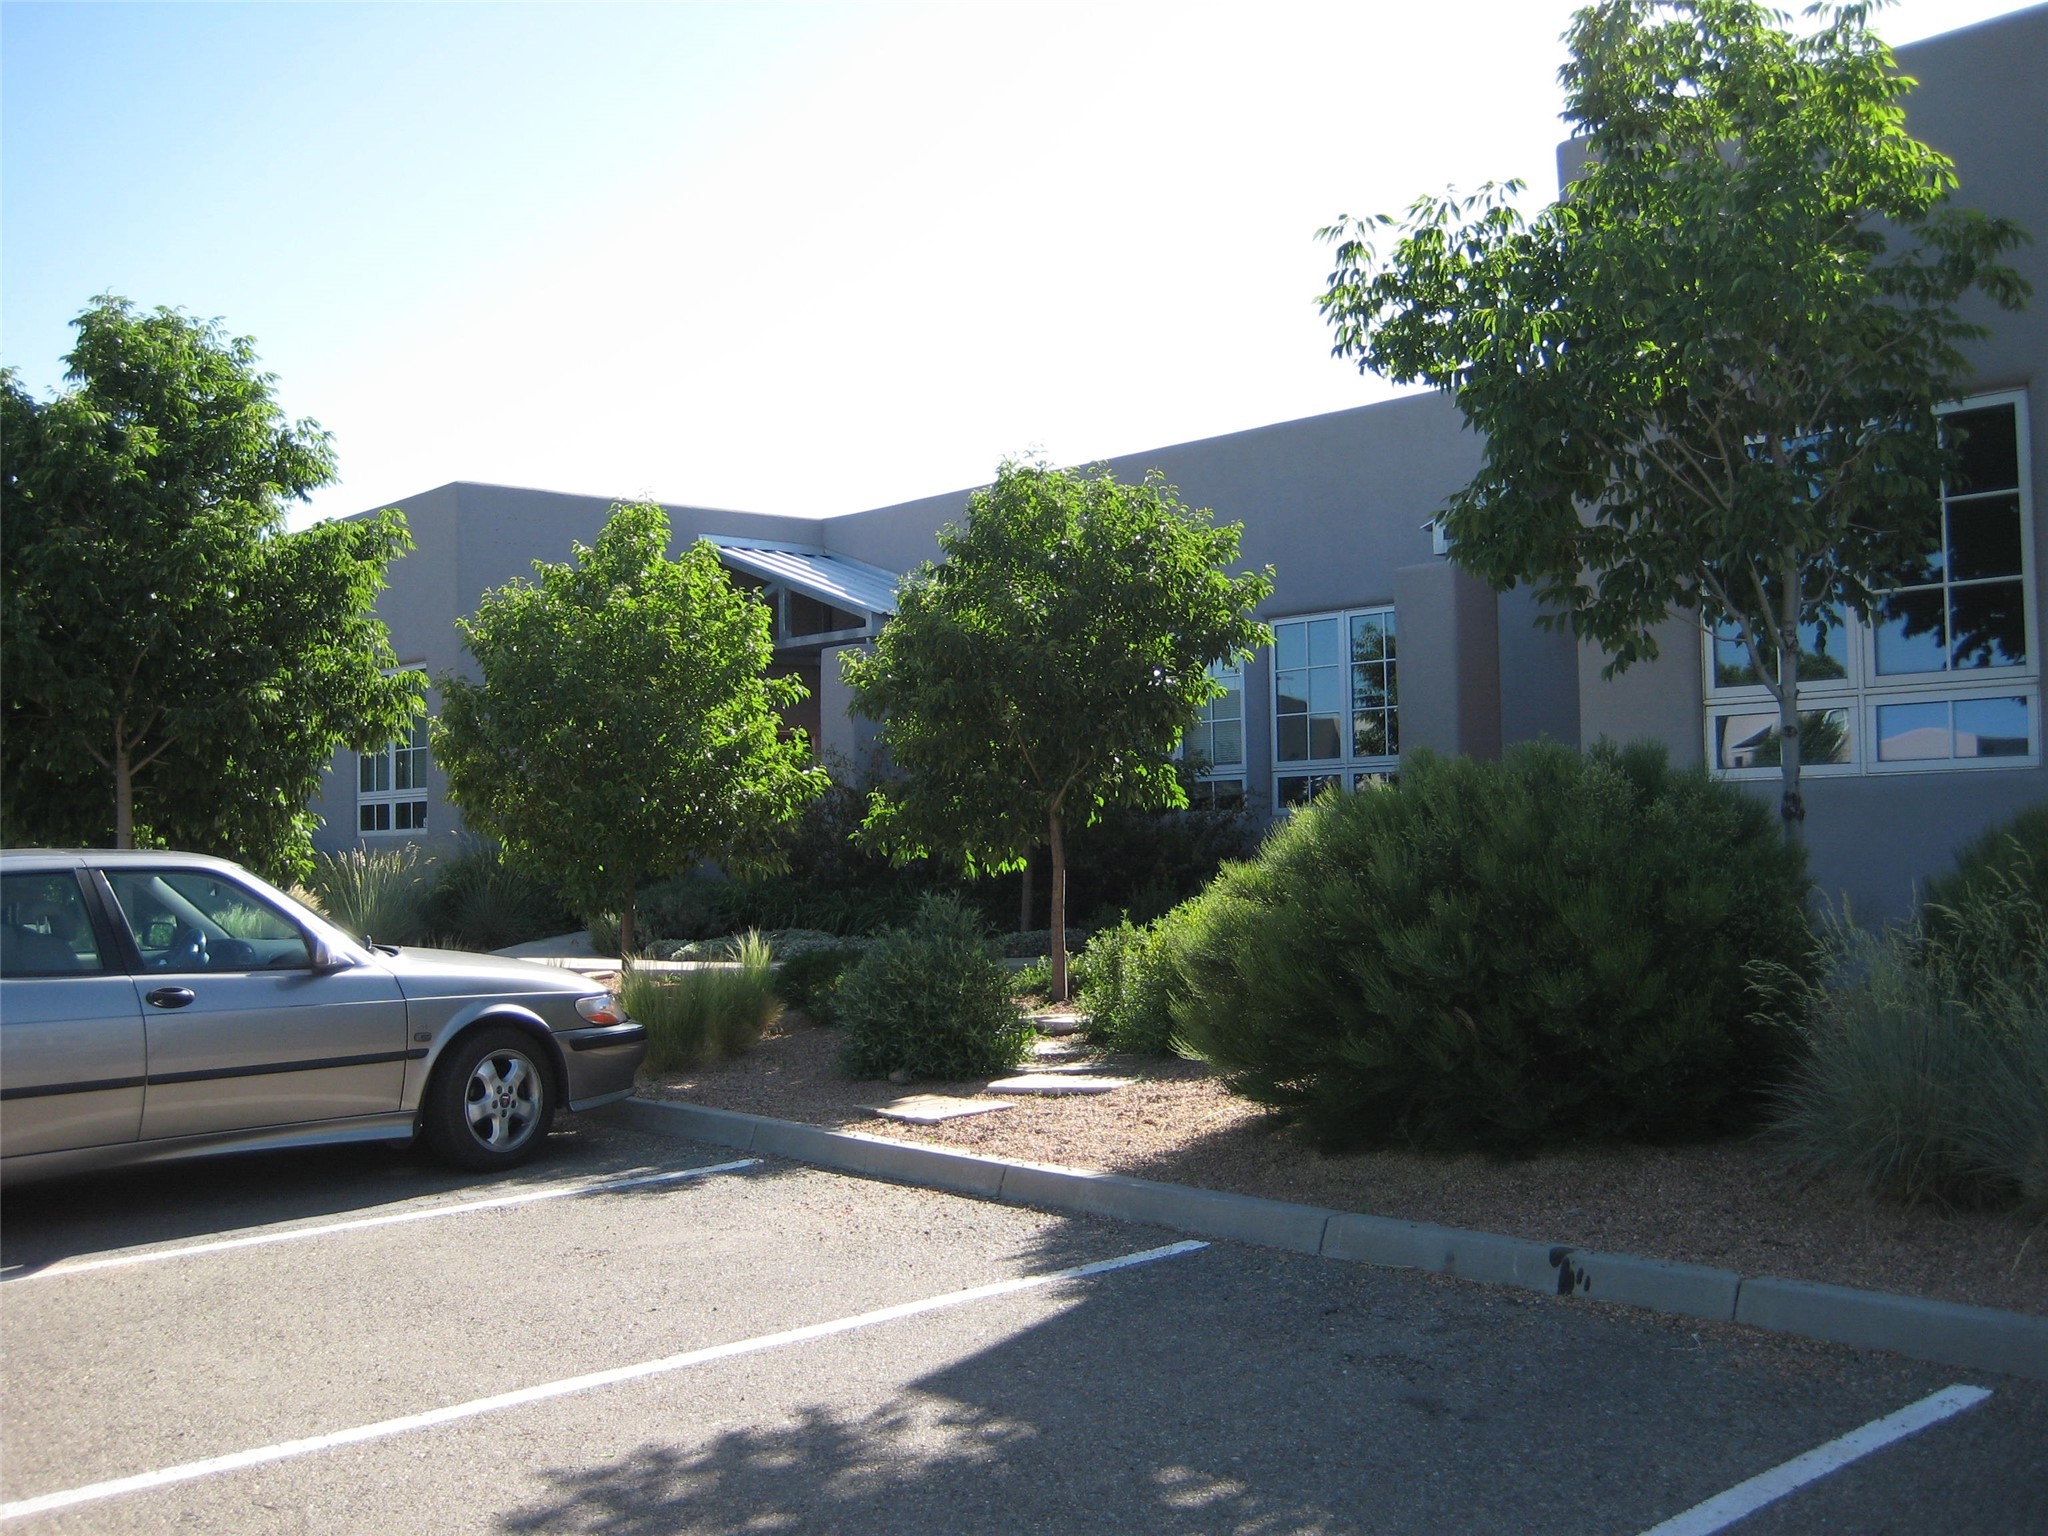 4001 Office Court Drive 506-507, Santa Fe, New Mexico 87507, ,Commercial Lease,For Rent,4001 Office Court Drive 506-507,202400833